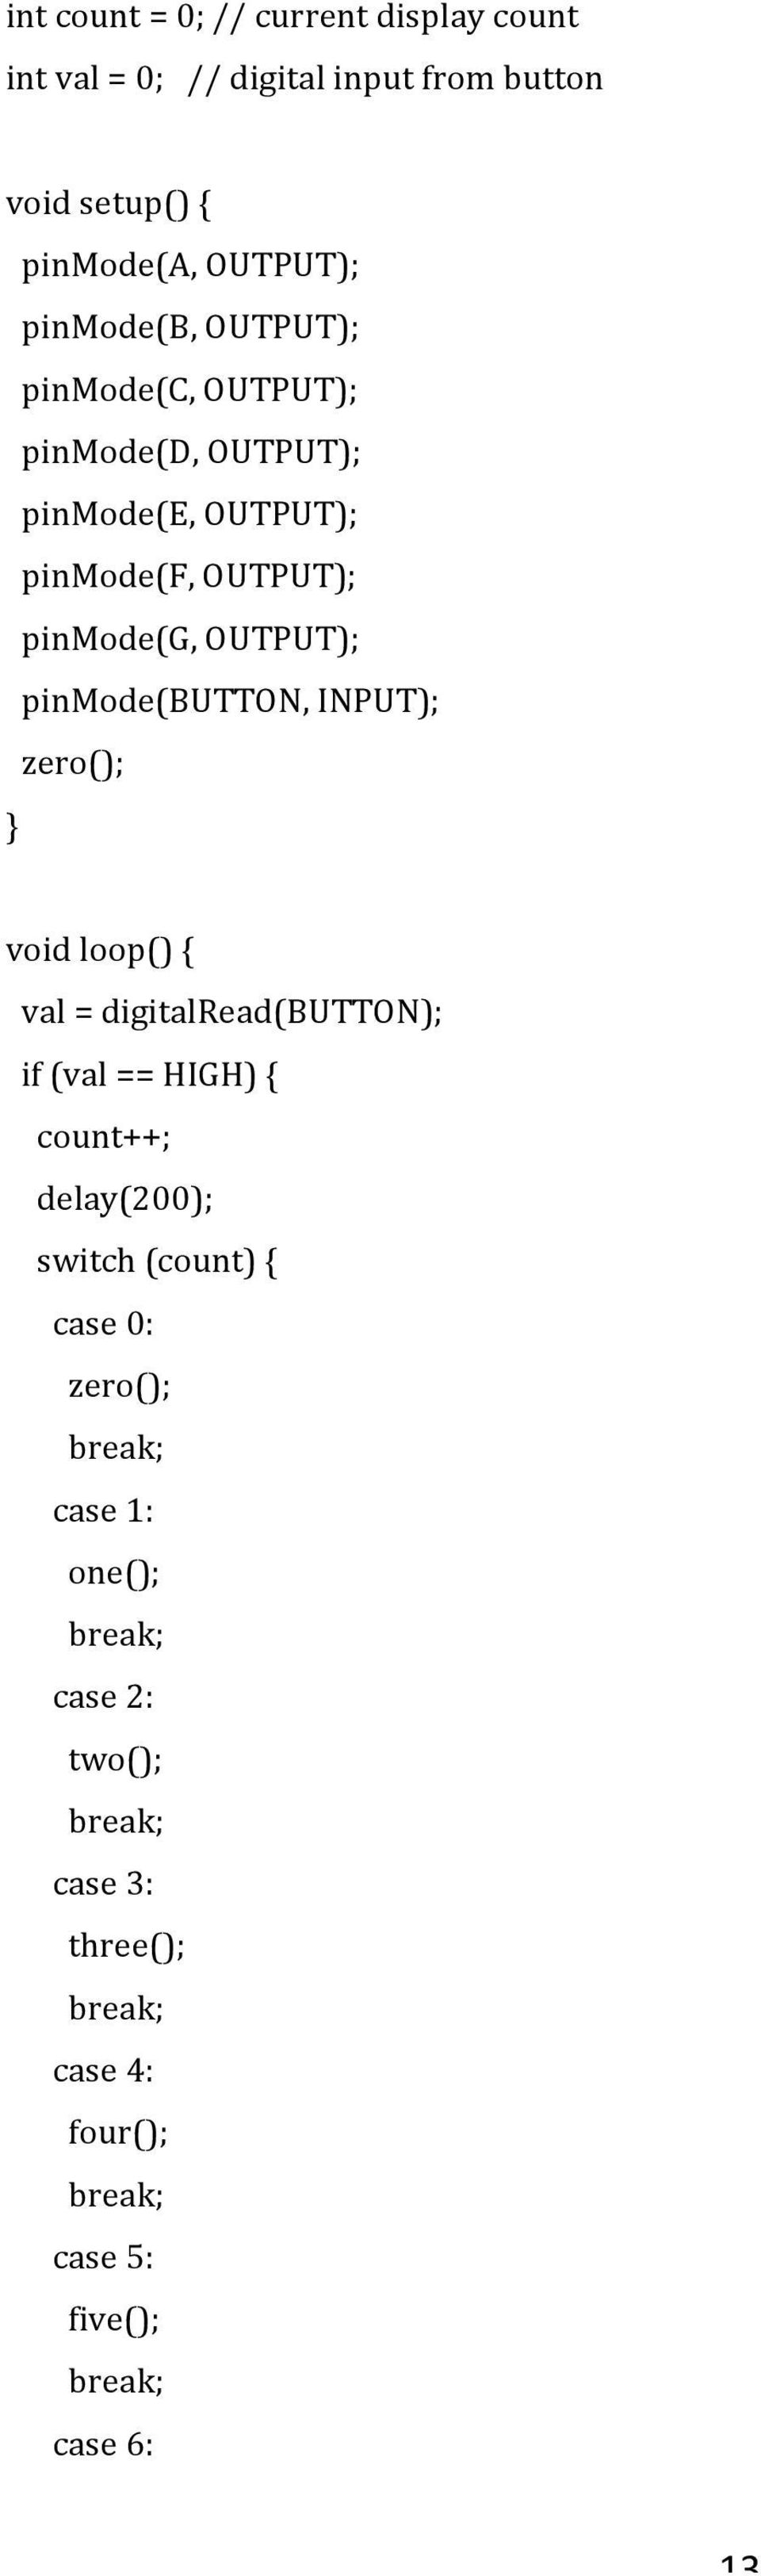 OUTPUT); pinmode(button, INPUT); zero(); void loop() { val = digitalread(button); if (val == HIGH) { count++;